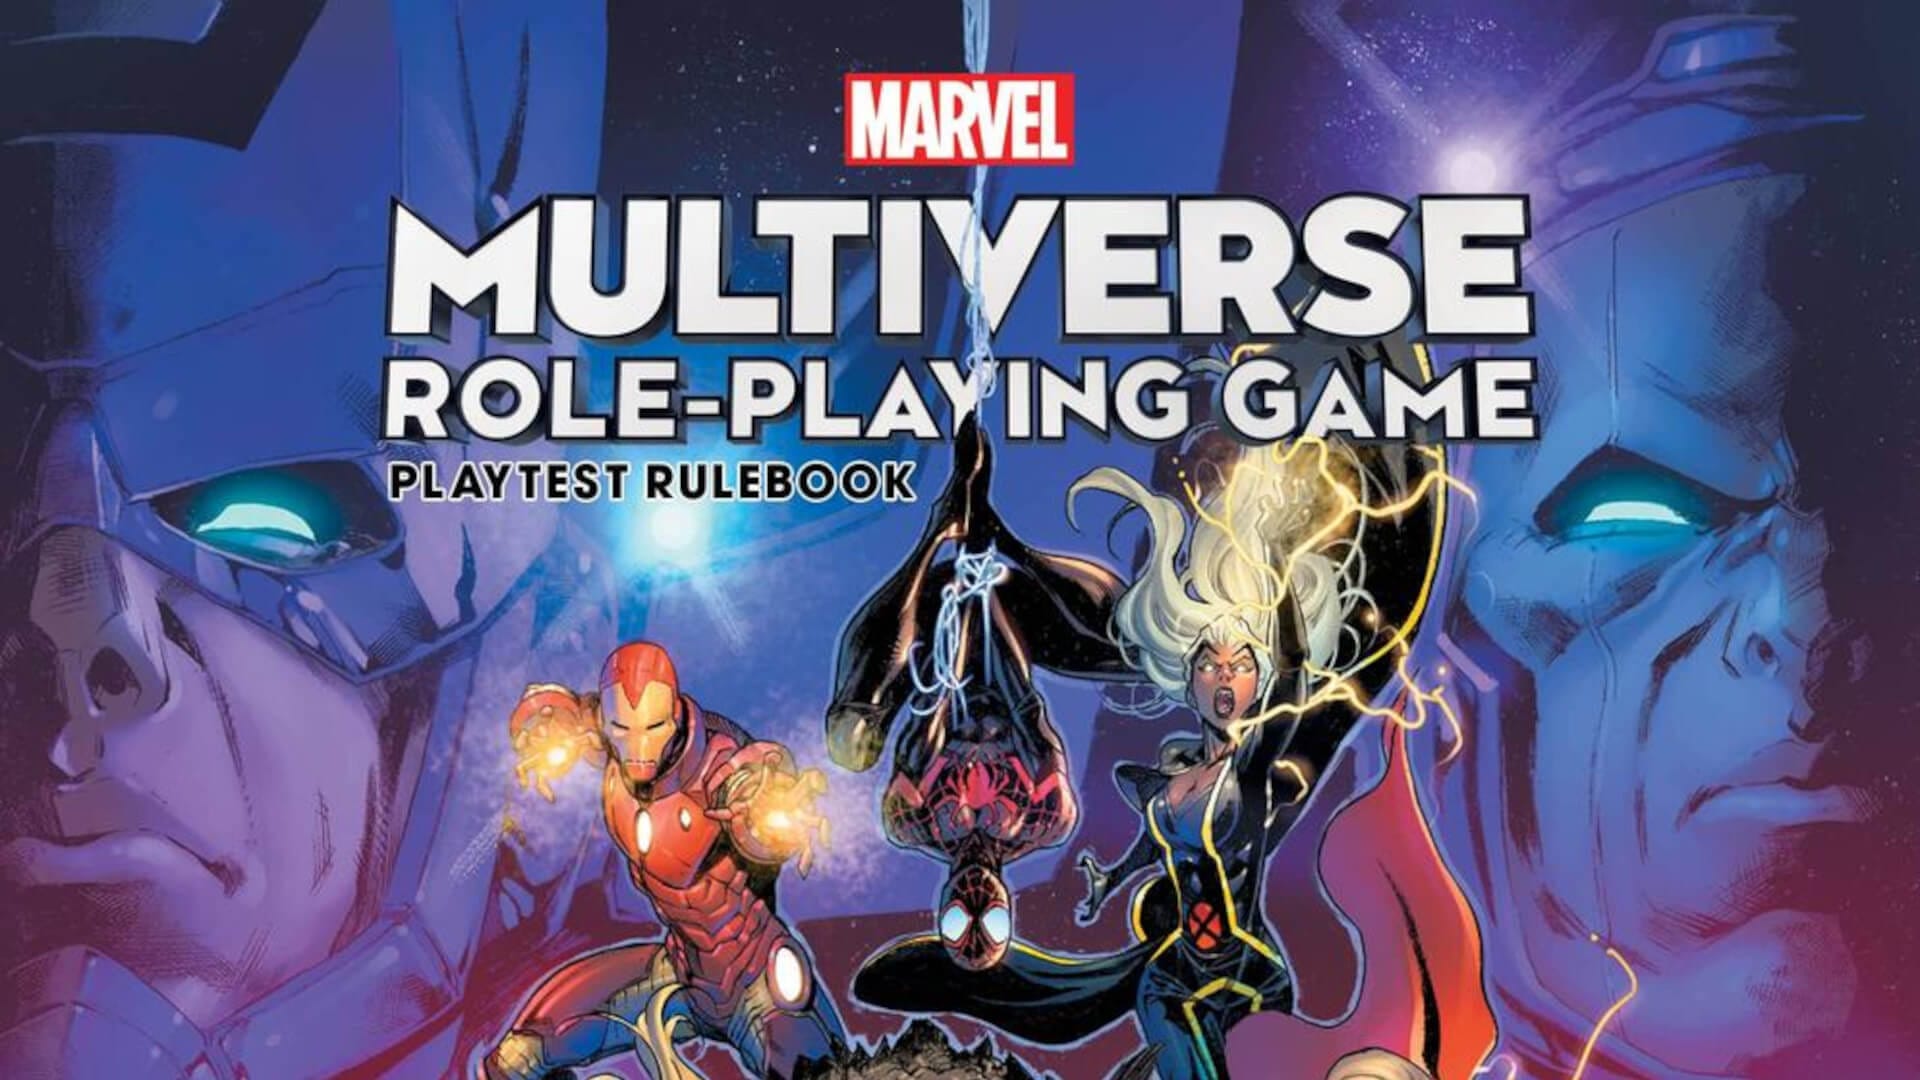 Spider-Man, Iron Man, and Storm on the cover of the new Marvel tabletop role-playing game